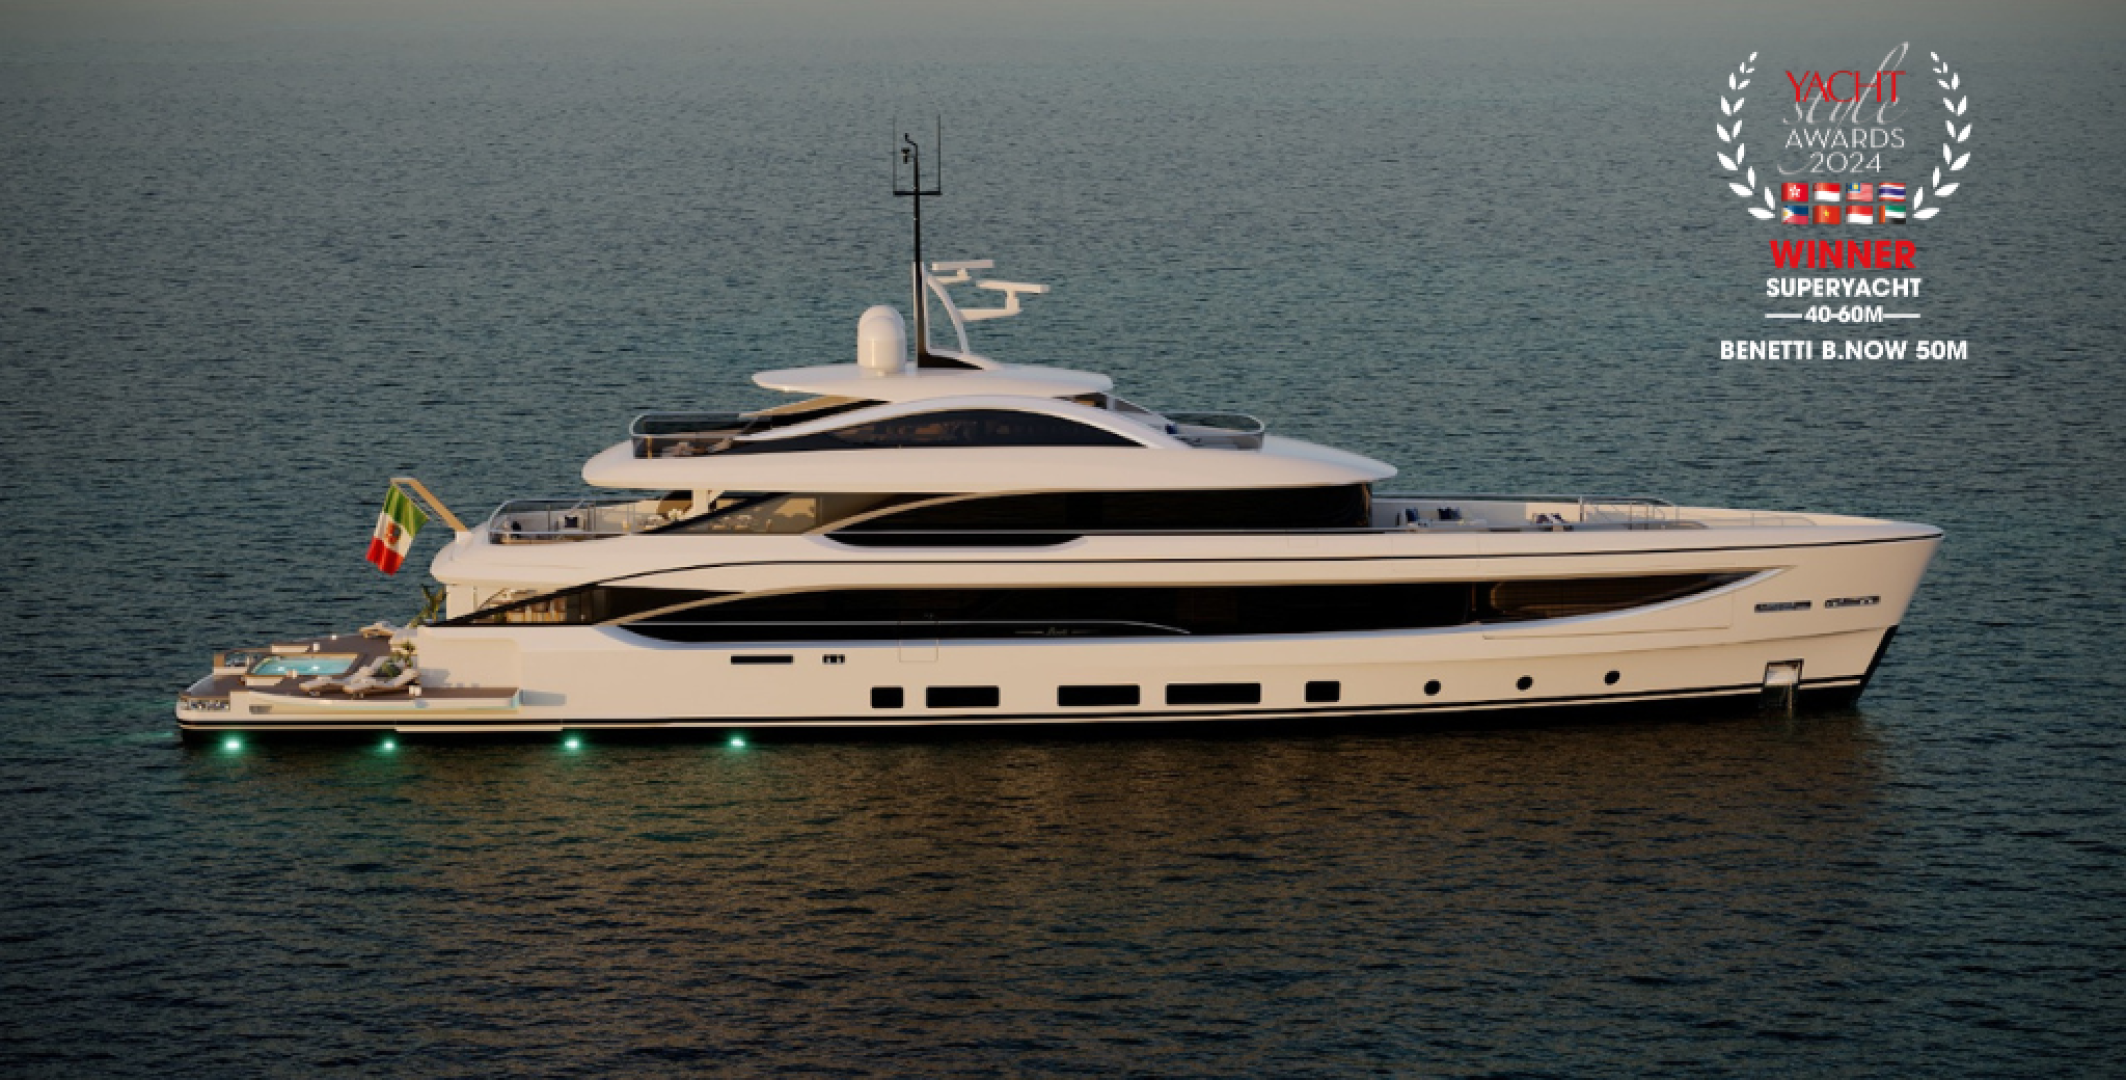 Benetti Group acclaimed at the Yacht Style Awards